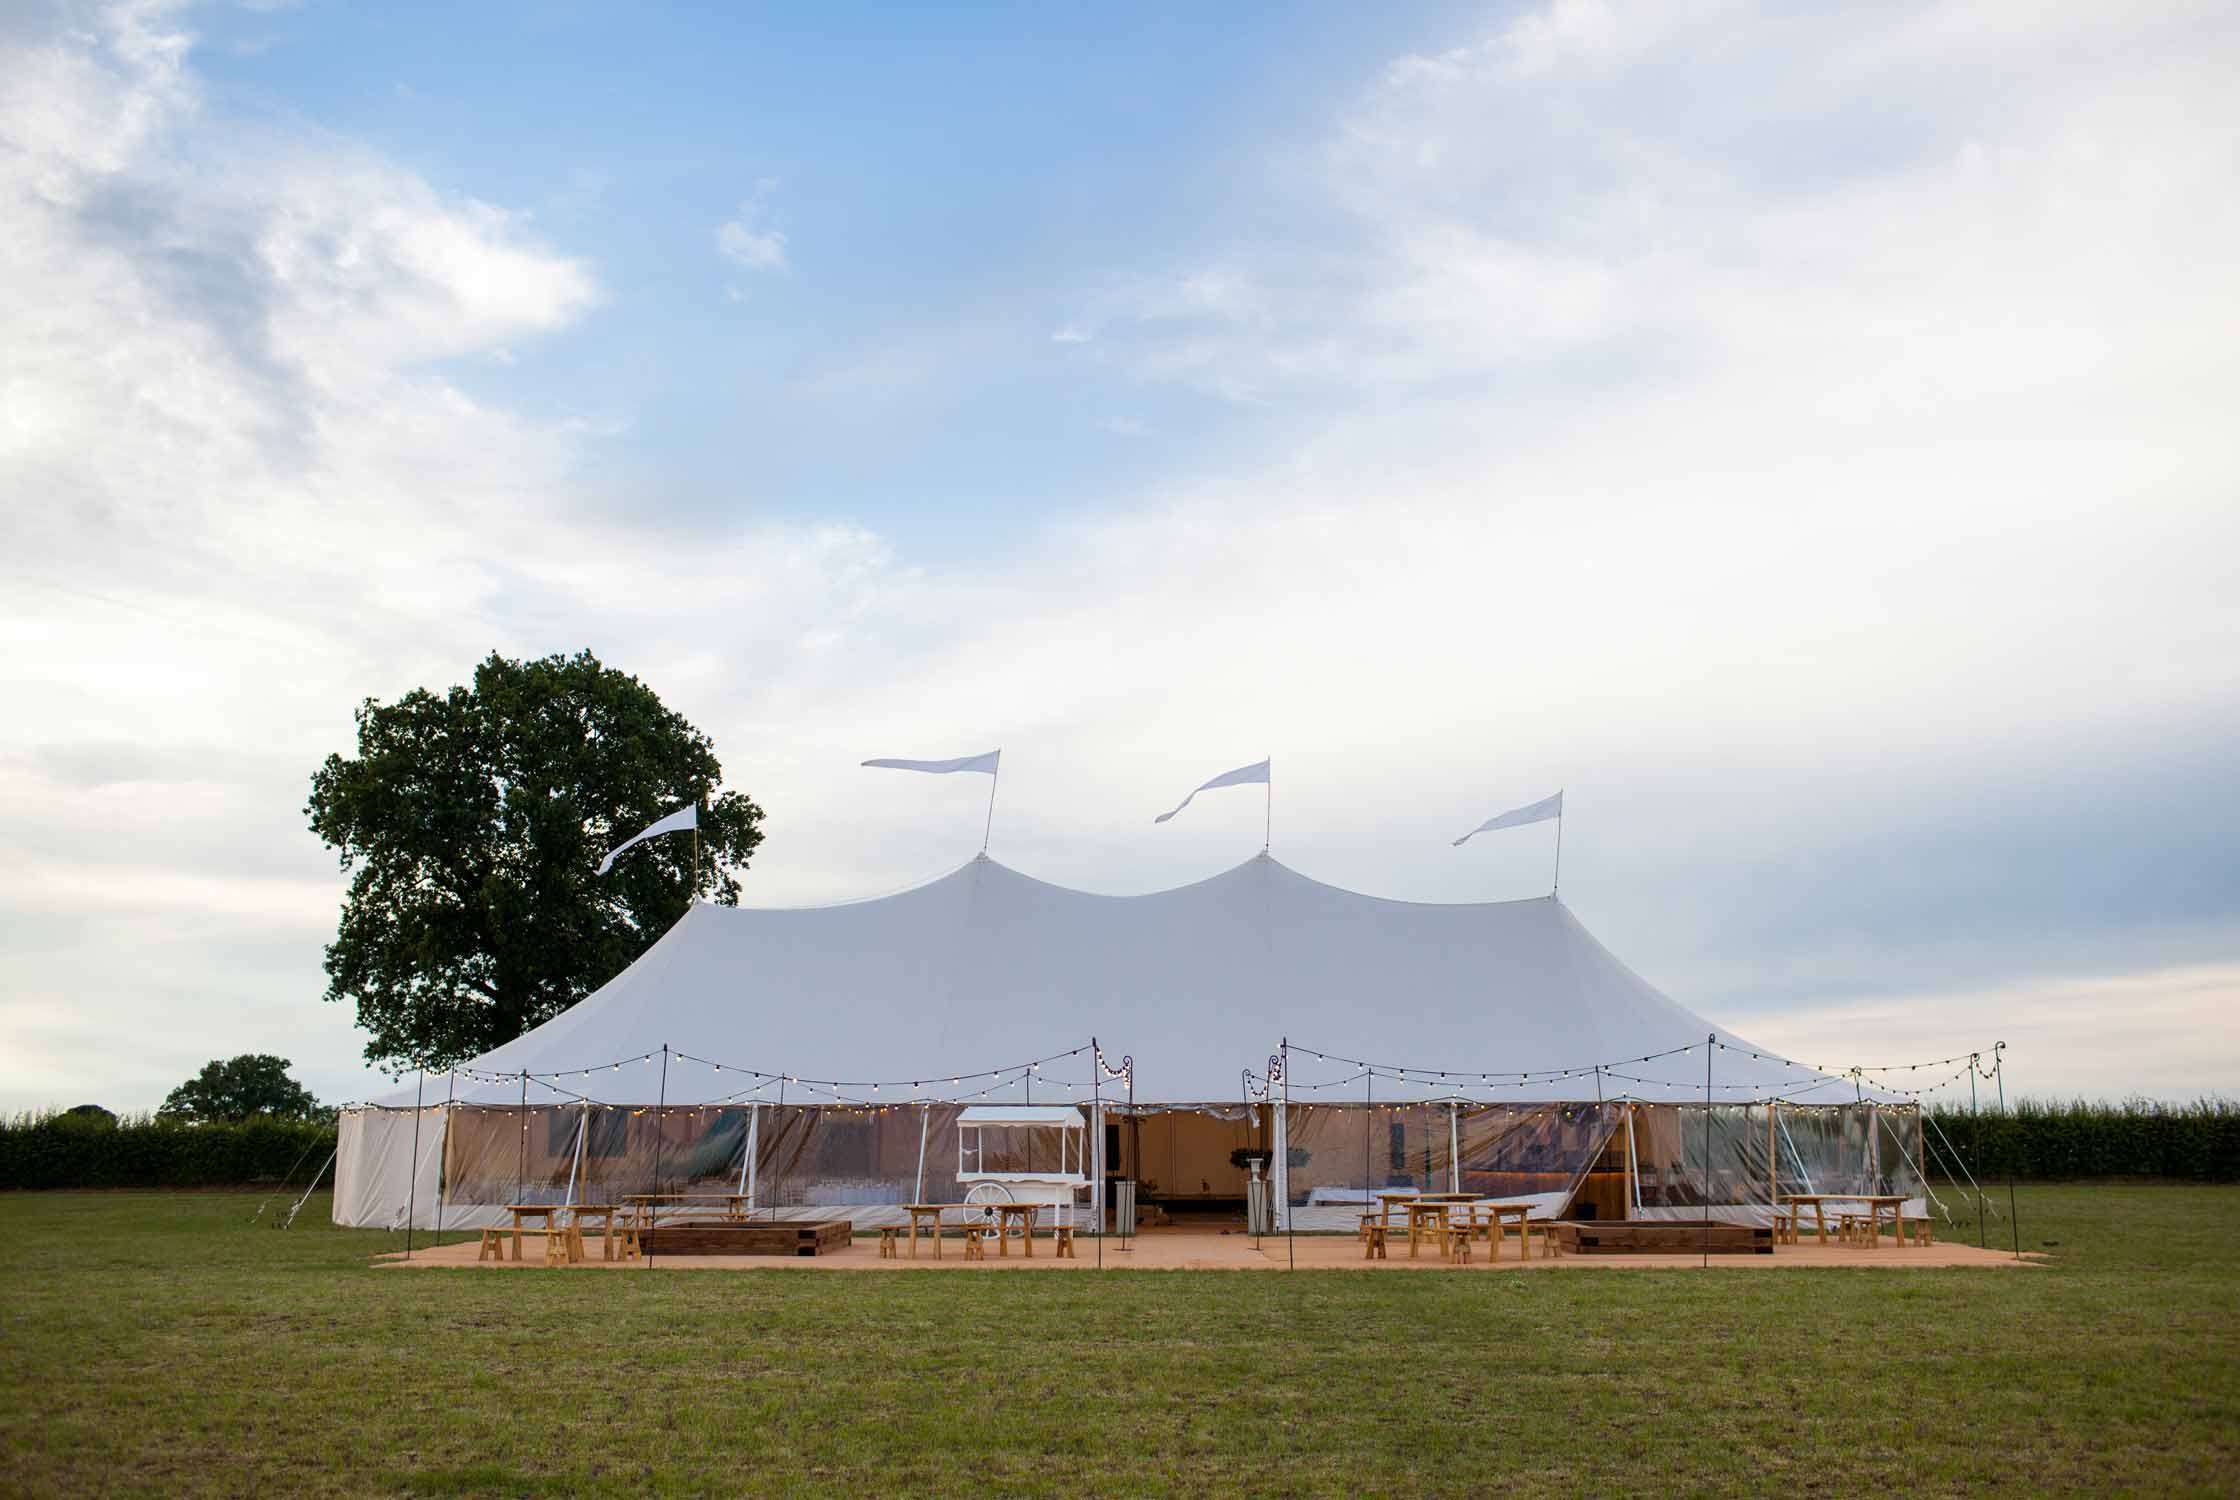 Marquee in a field with festoon lights surrounding.